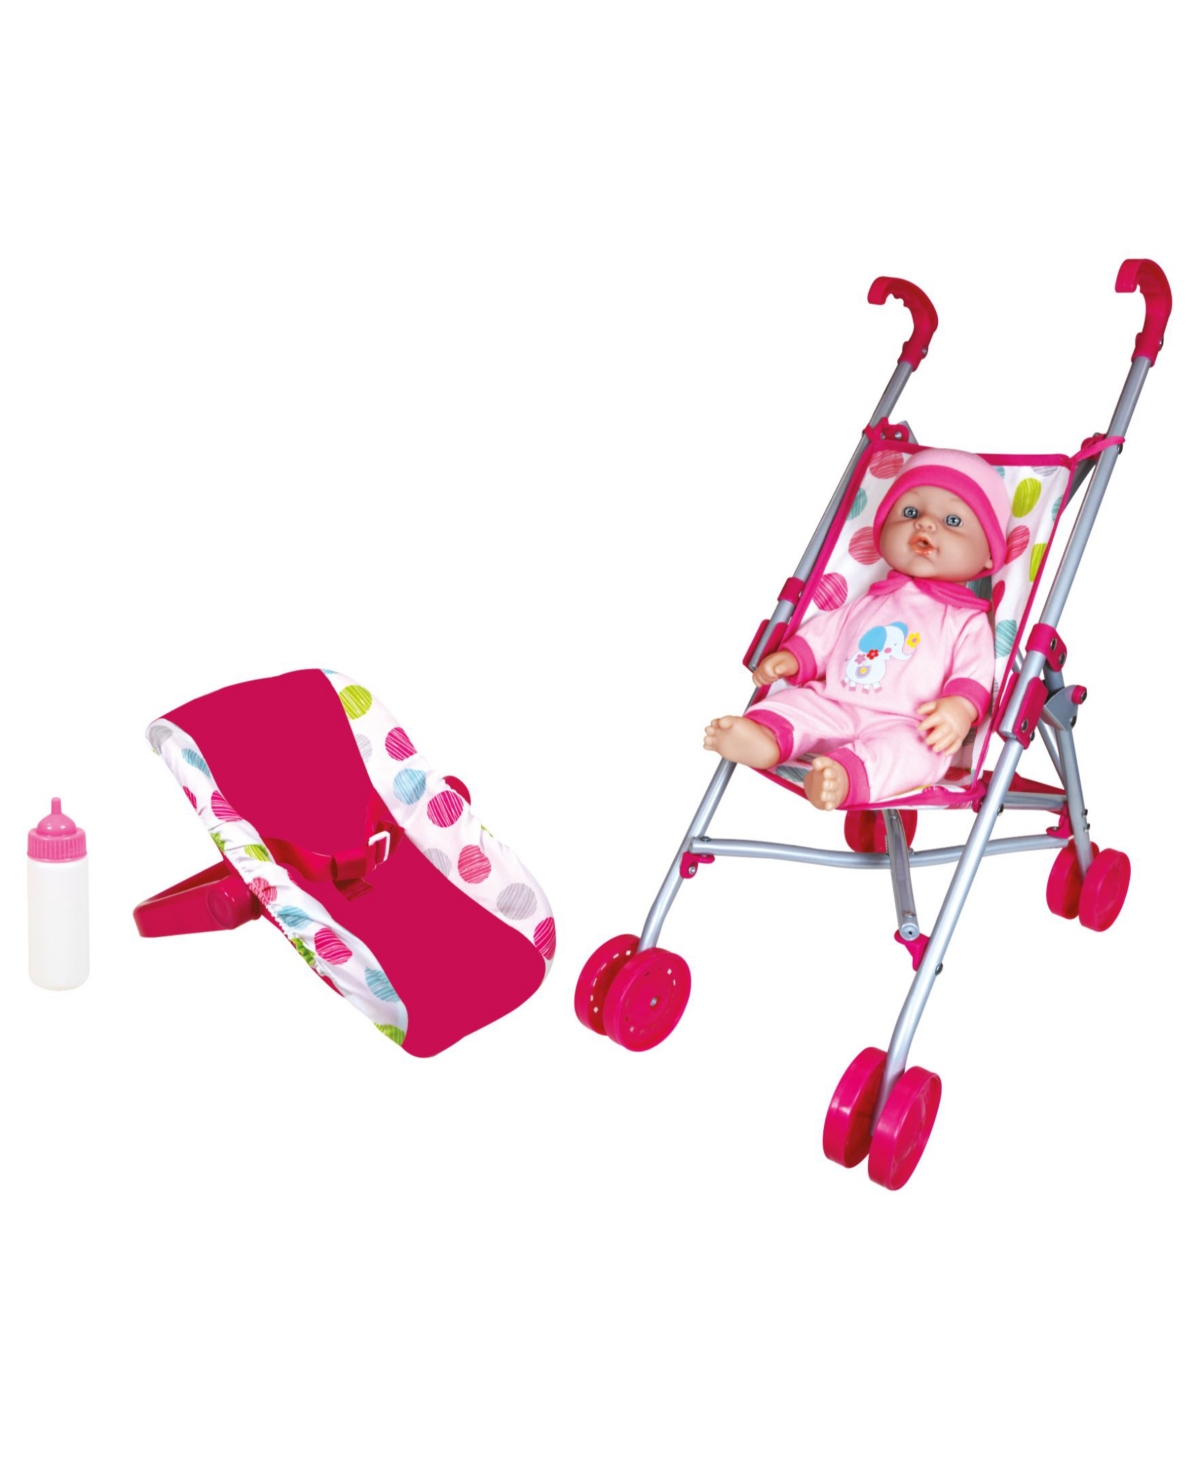 Lissi Dolls Twin Baby Dolls With Twin Jogger Stroller In Multi